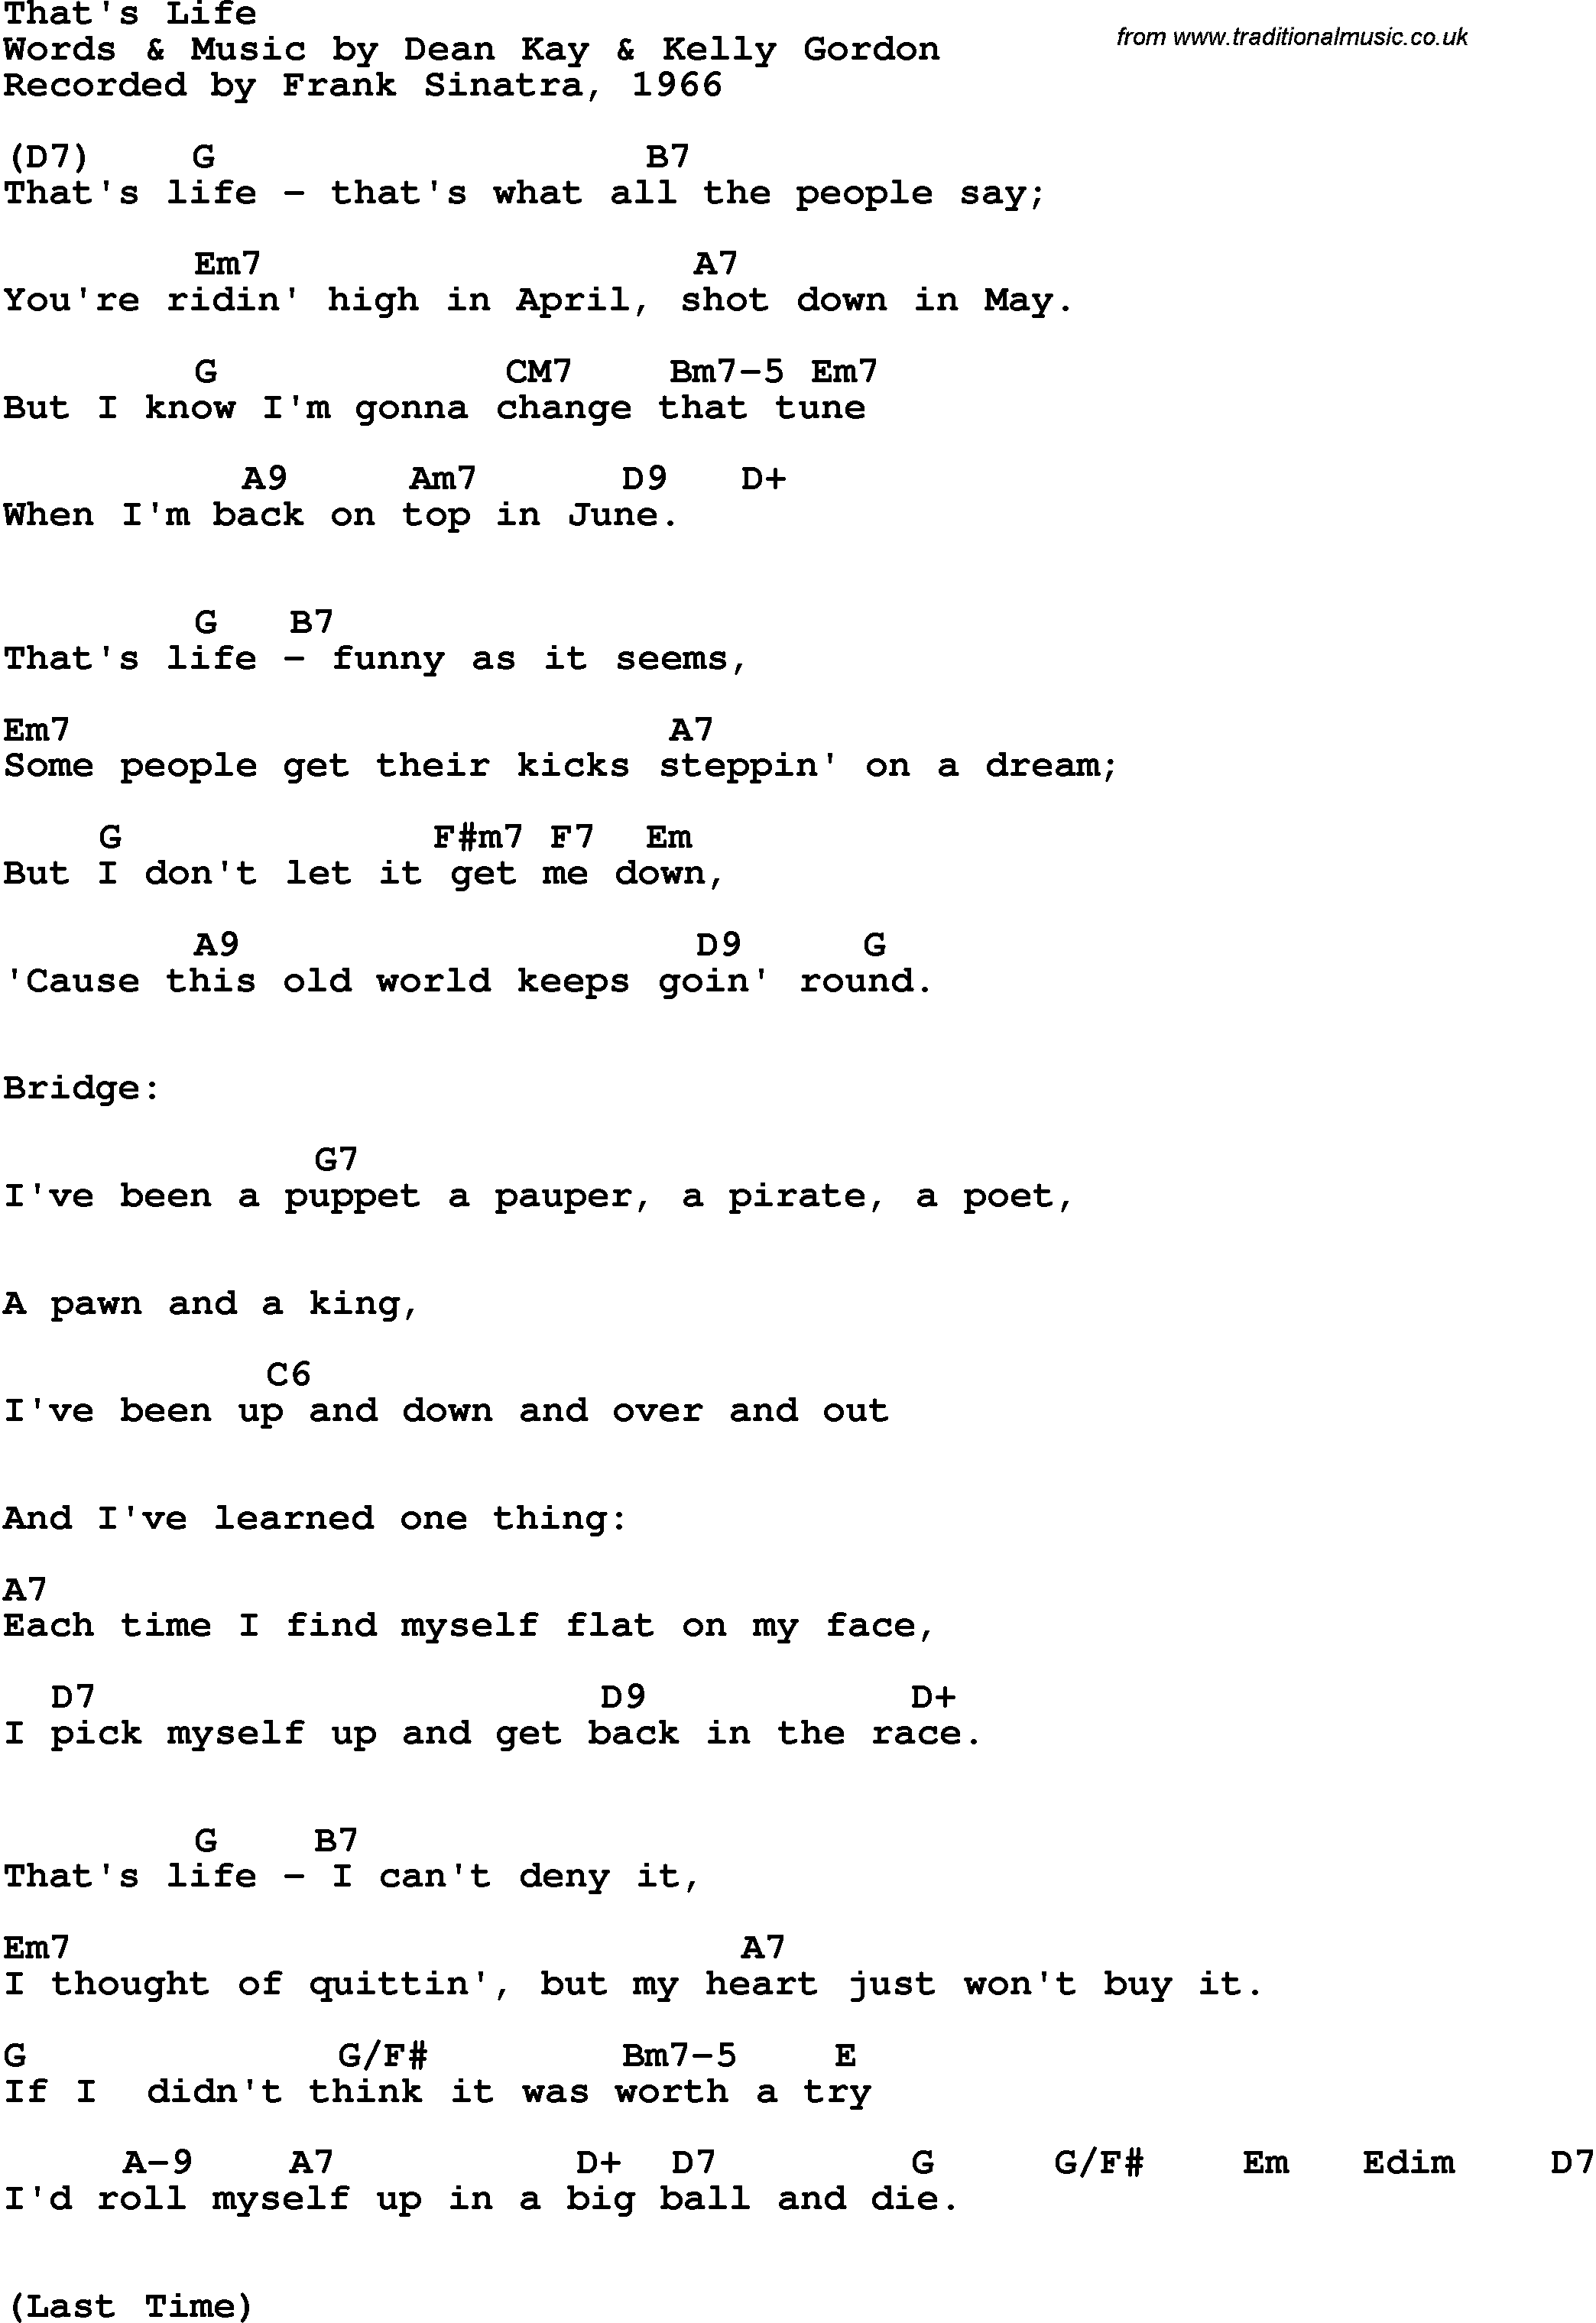 Song Lyrics with guitar chords for That's Life - Frank Sinatra, 1966